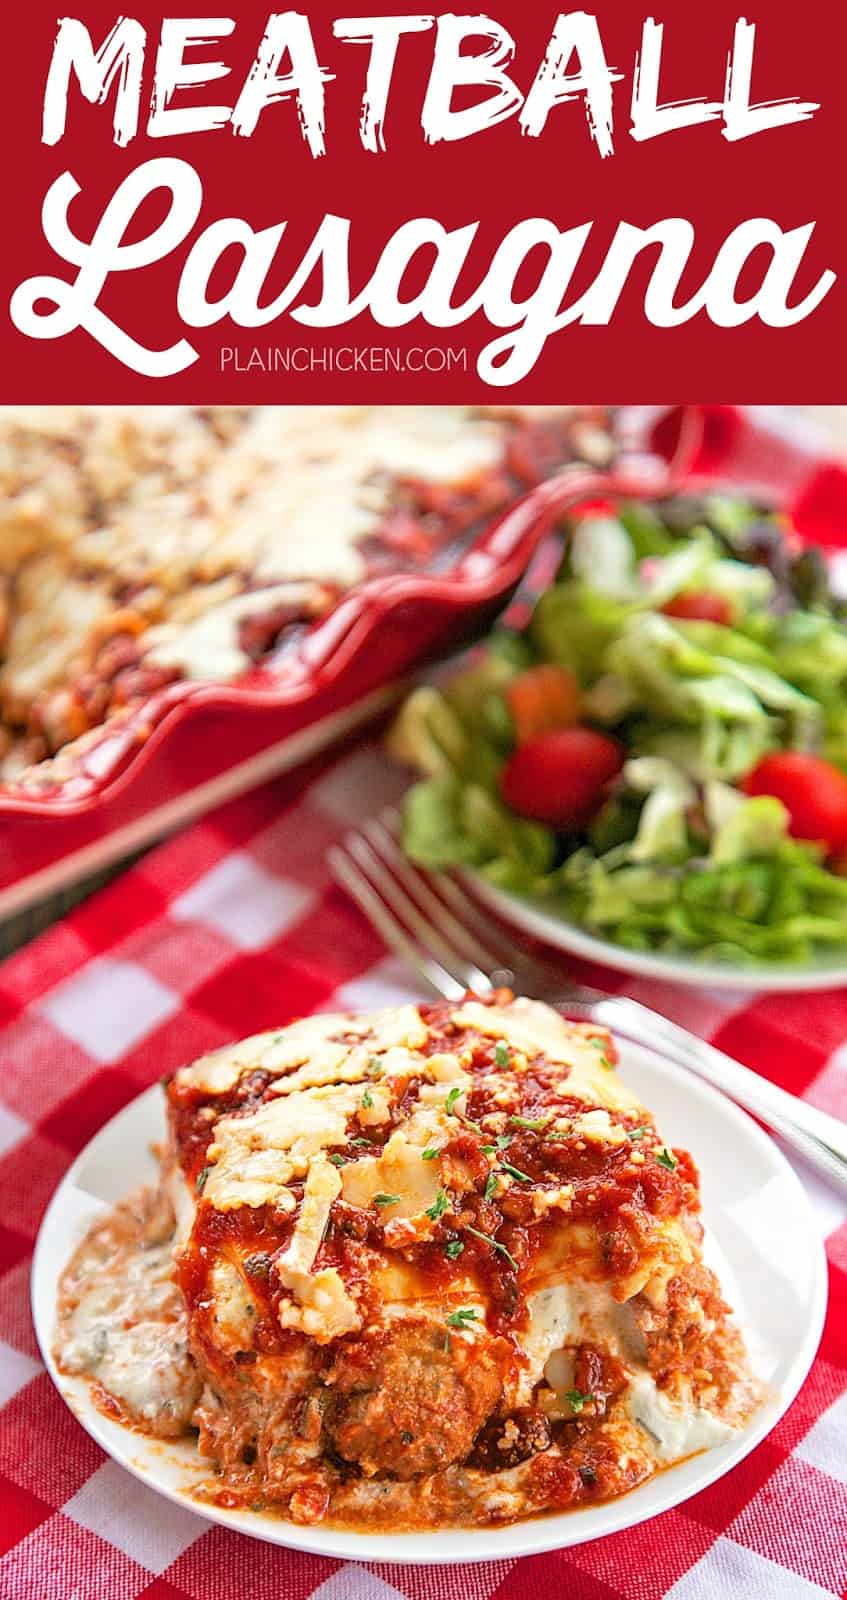 Meatball Lasagna - no meat to brown and no noodles to boil. Great weeknight casserole! Ricotta, mozzarella, parmesan, chive-and-onion cream cheese, pasta sauce, egg roll wrappers and frozen meatballs. Ready for the oven in minutes!! Everyone loved this lasagna!! SO easy and SO delicious! 